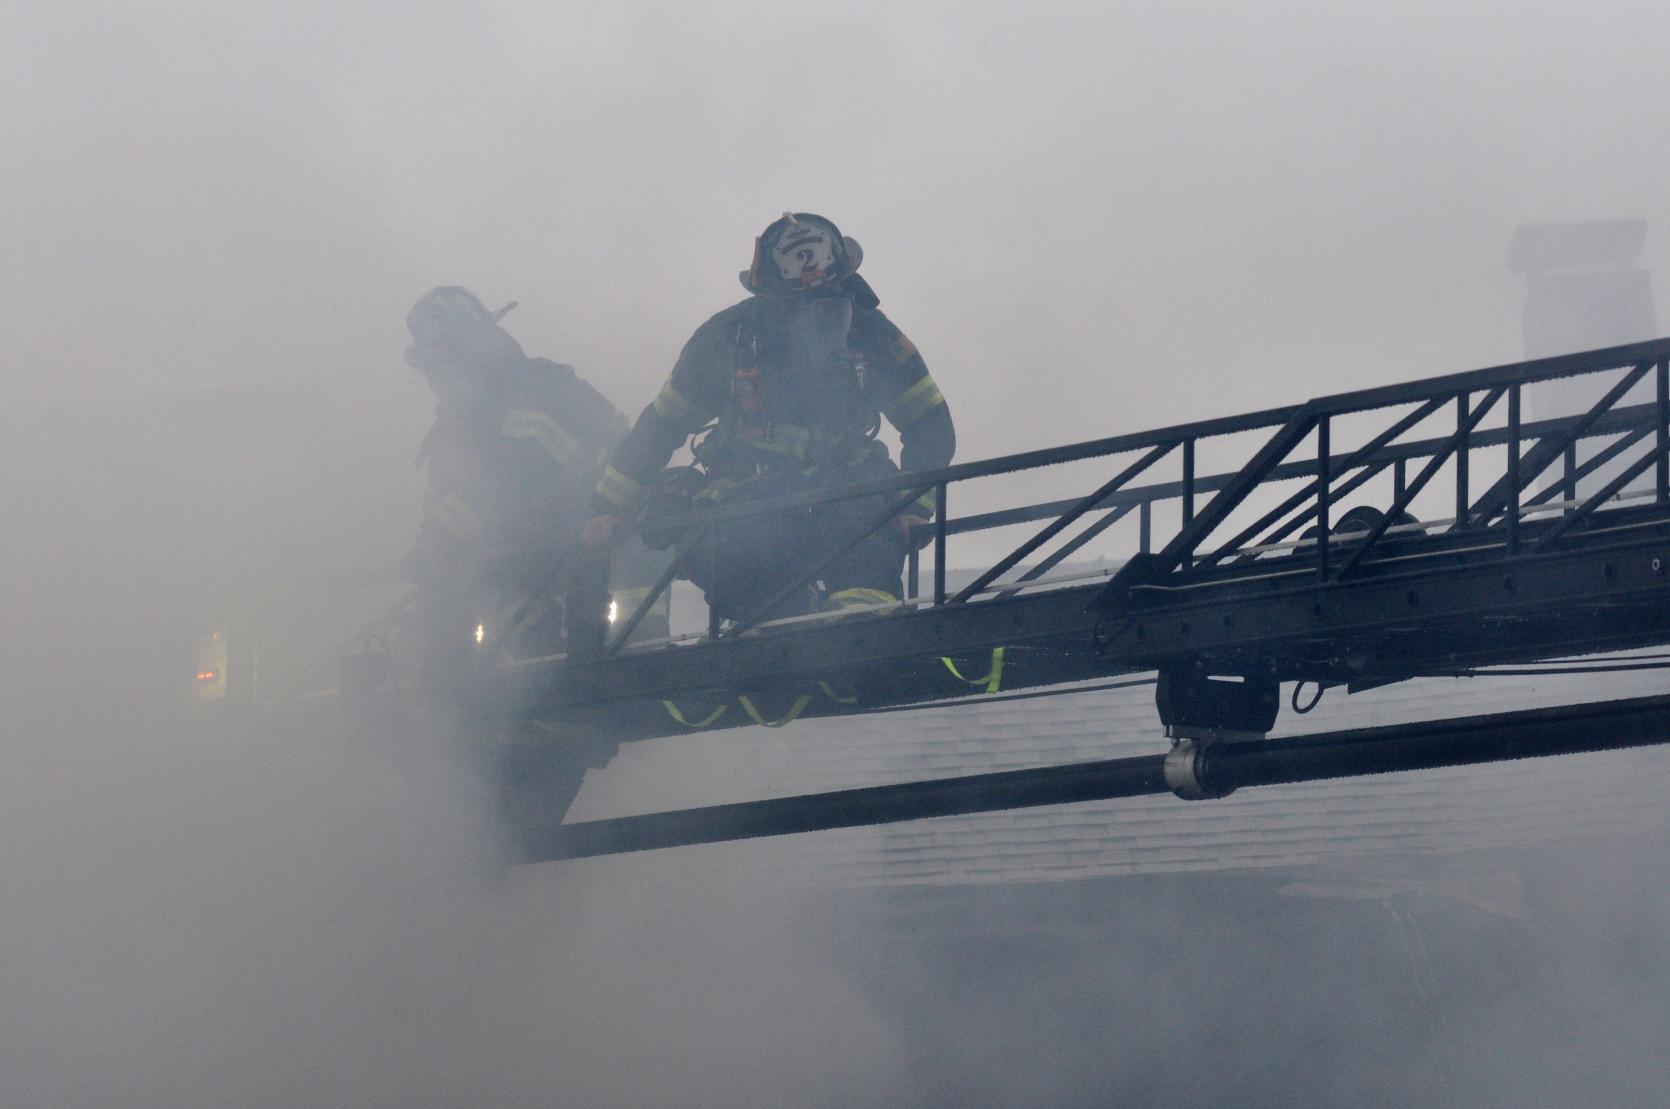 Two firefighters emerging from smoke on an aerial ladder